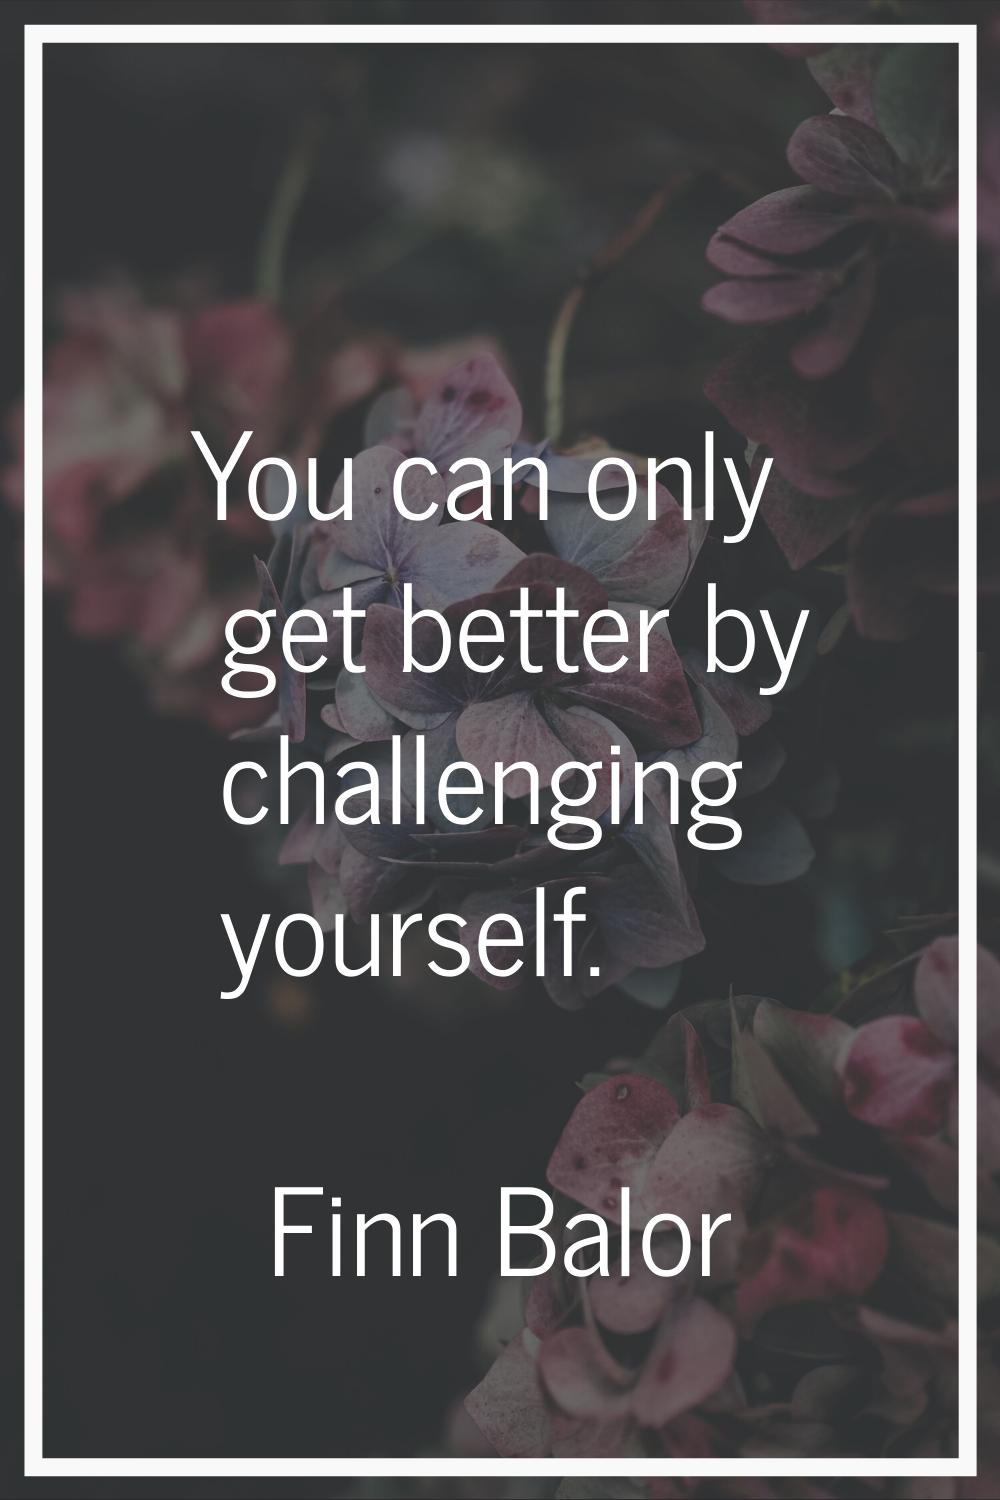 You can only get better by challenging yourself.